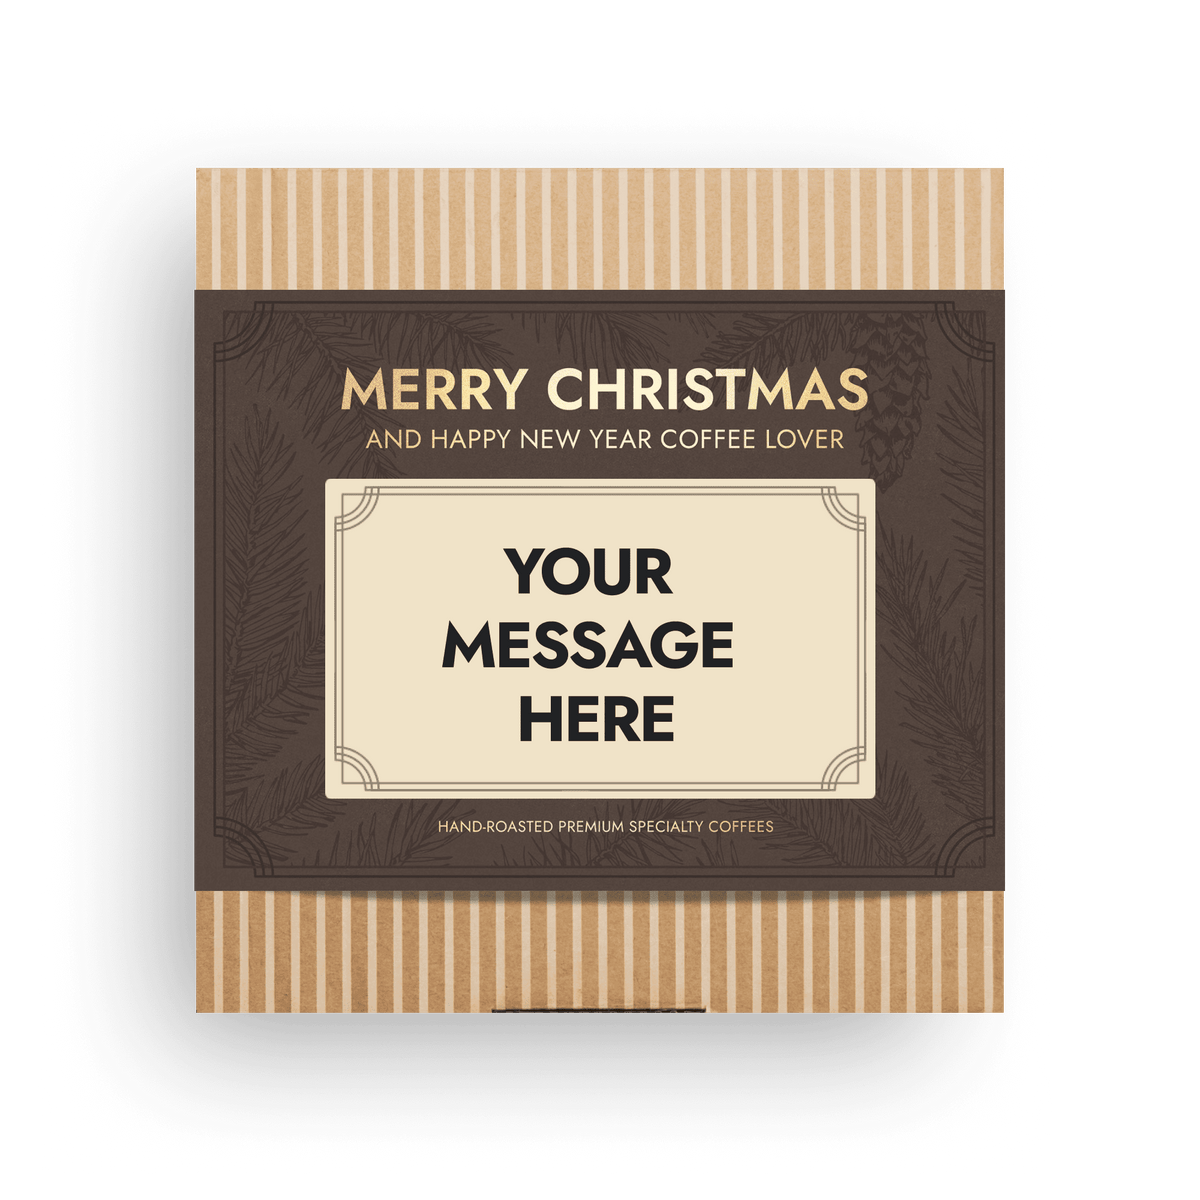 PERSONALIZED SPECIALTY COFFEE BEAN CHRISTMAS GIFT BOX Gift Boxes The Brew Company